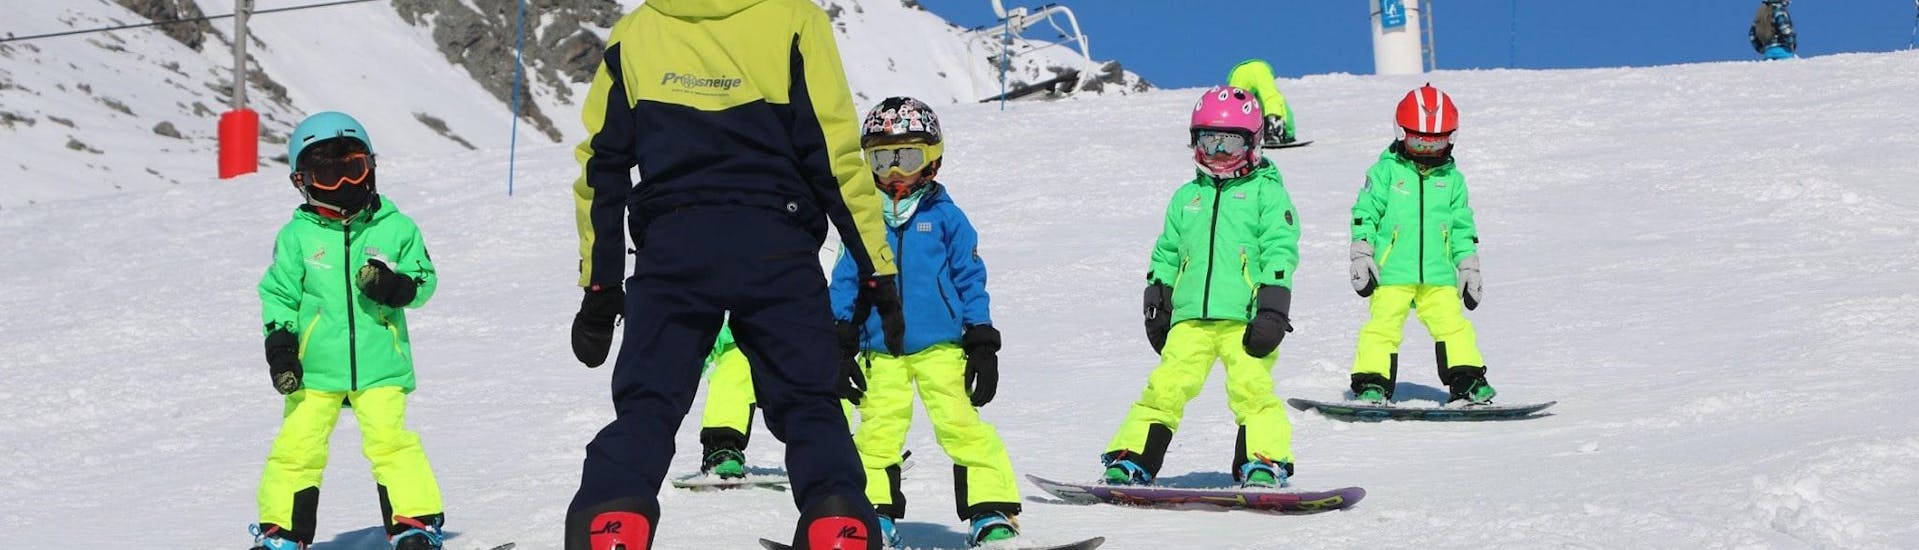 A ski instructor fro the ski school Prosneige Val Thorens & Les Menuires is teaching smiling kids during Snowboarding Lessons for Kids of All Ages and All Levels.